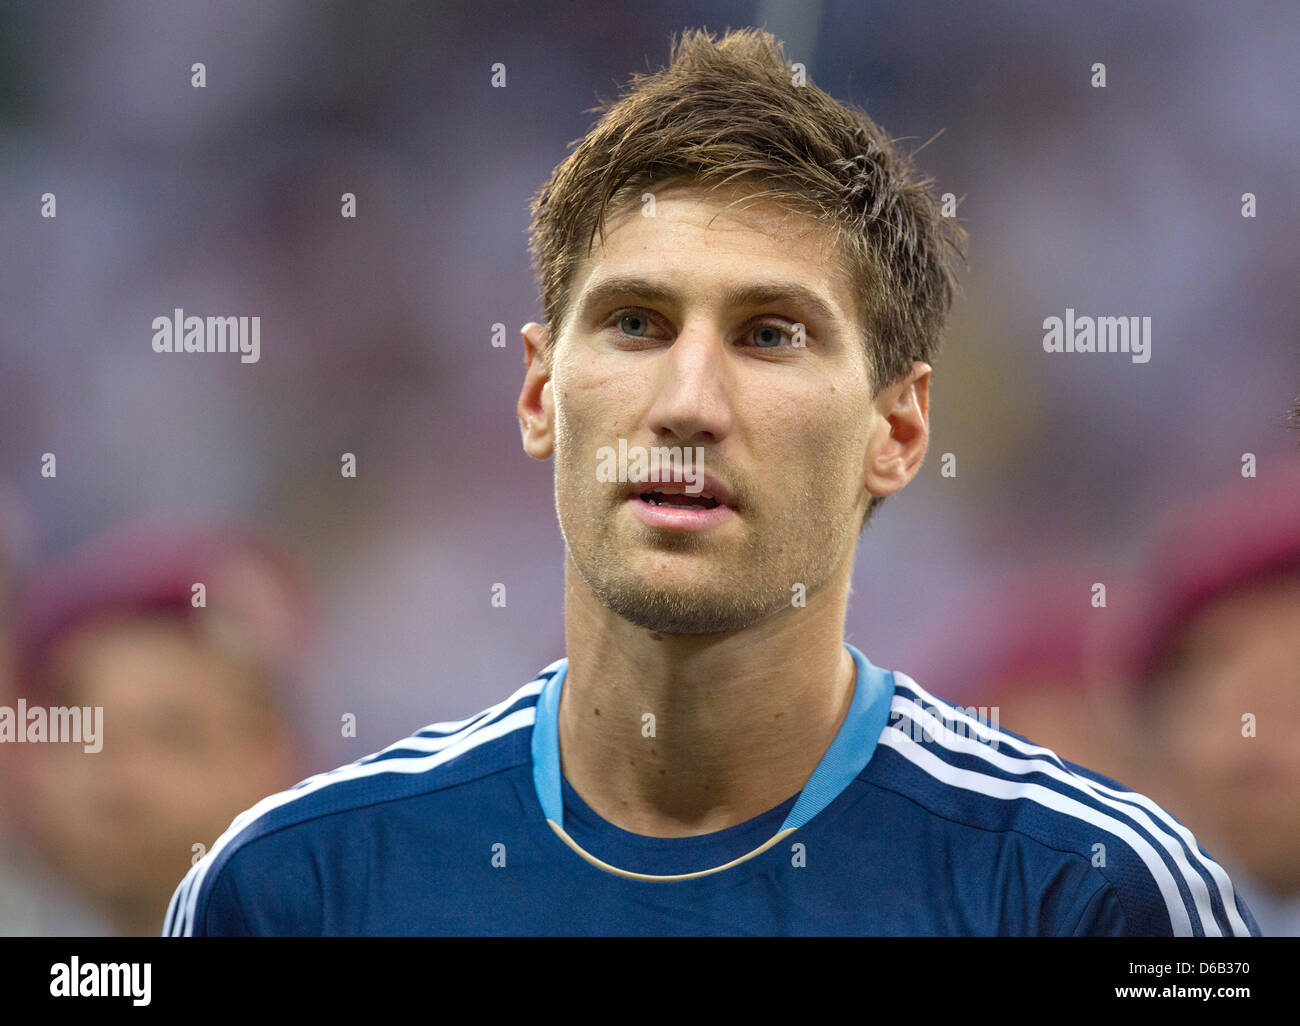 Argentina's Federico Fernandez during the friendly soccer match Germany against Argentina at the Commerzbank-Arena in Frankfurt/ Main, Germany, 15 August 2012. Photo: Uwe Anspach dpa/lhe Stock Photo